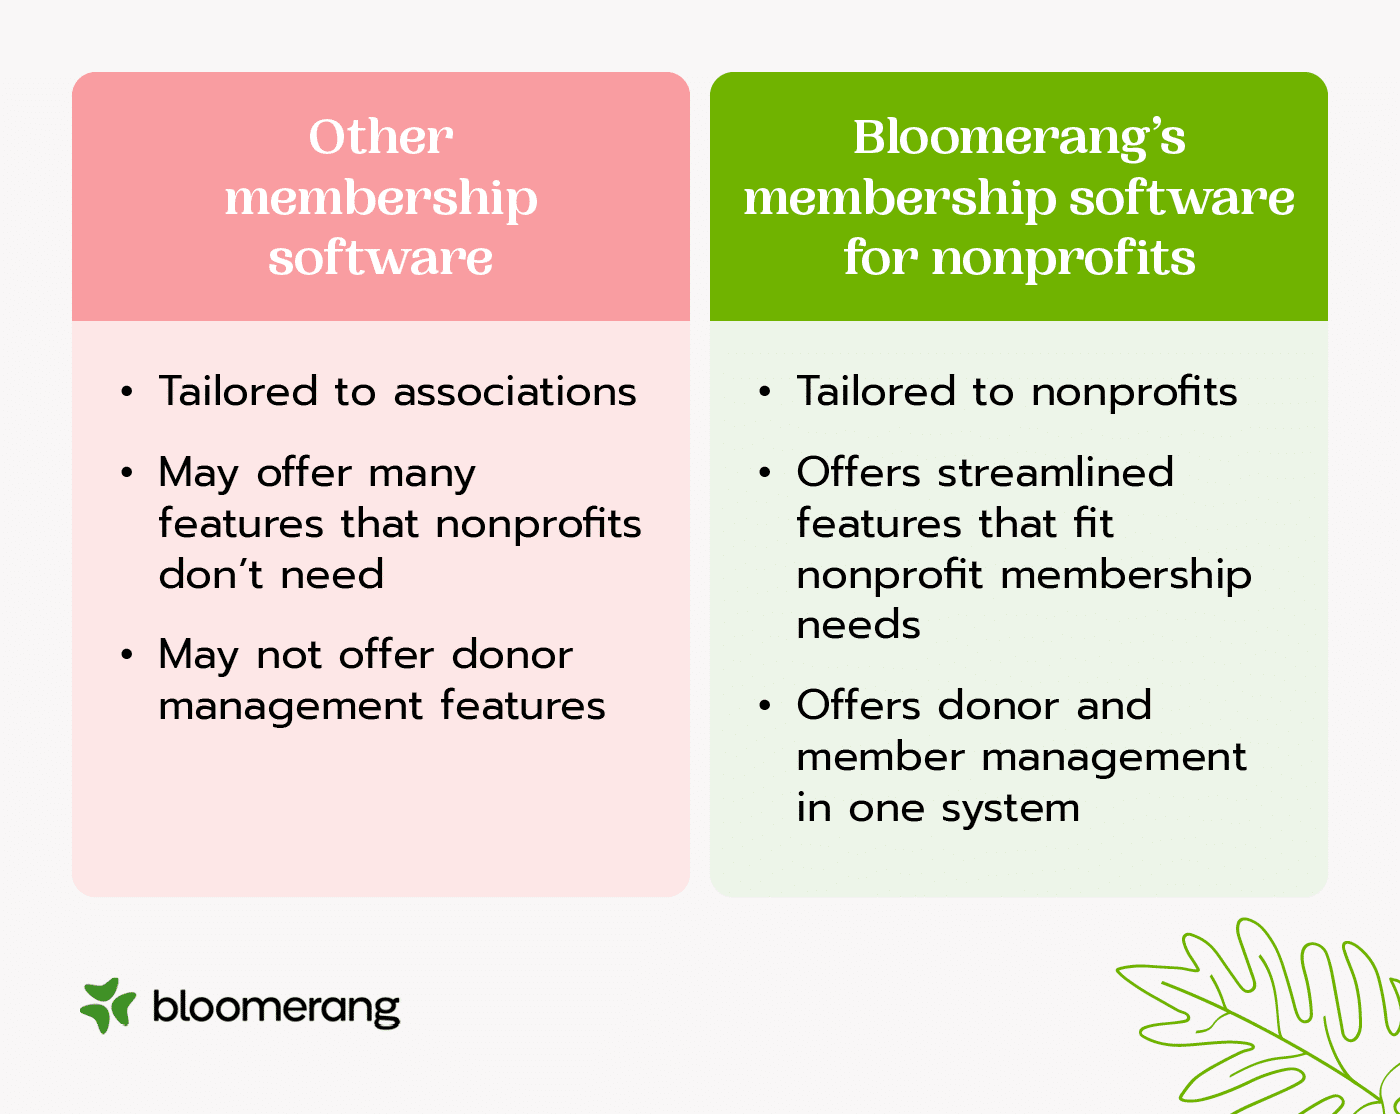 Comparison of other membership software vs. Bloomerang’s membership software for nonprofits